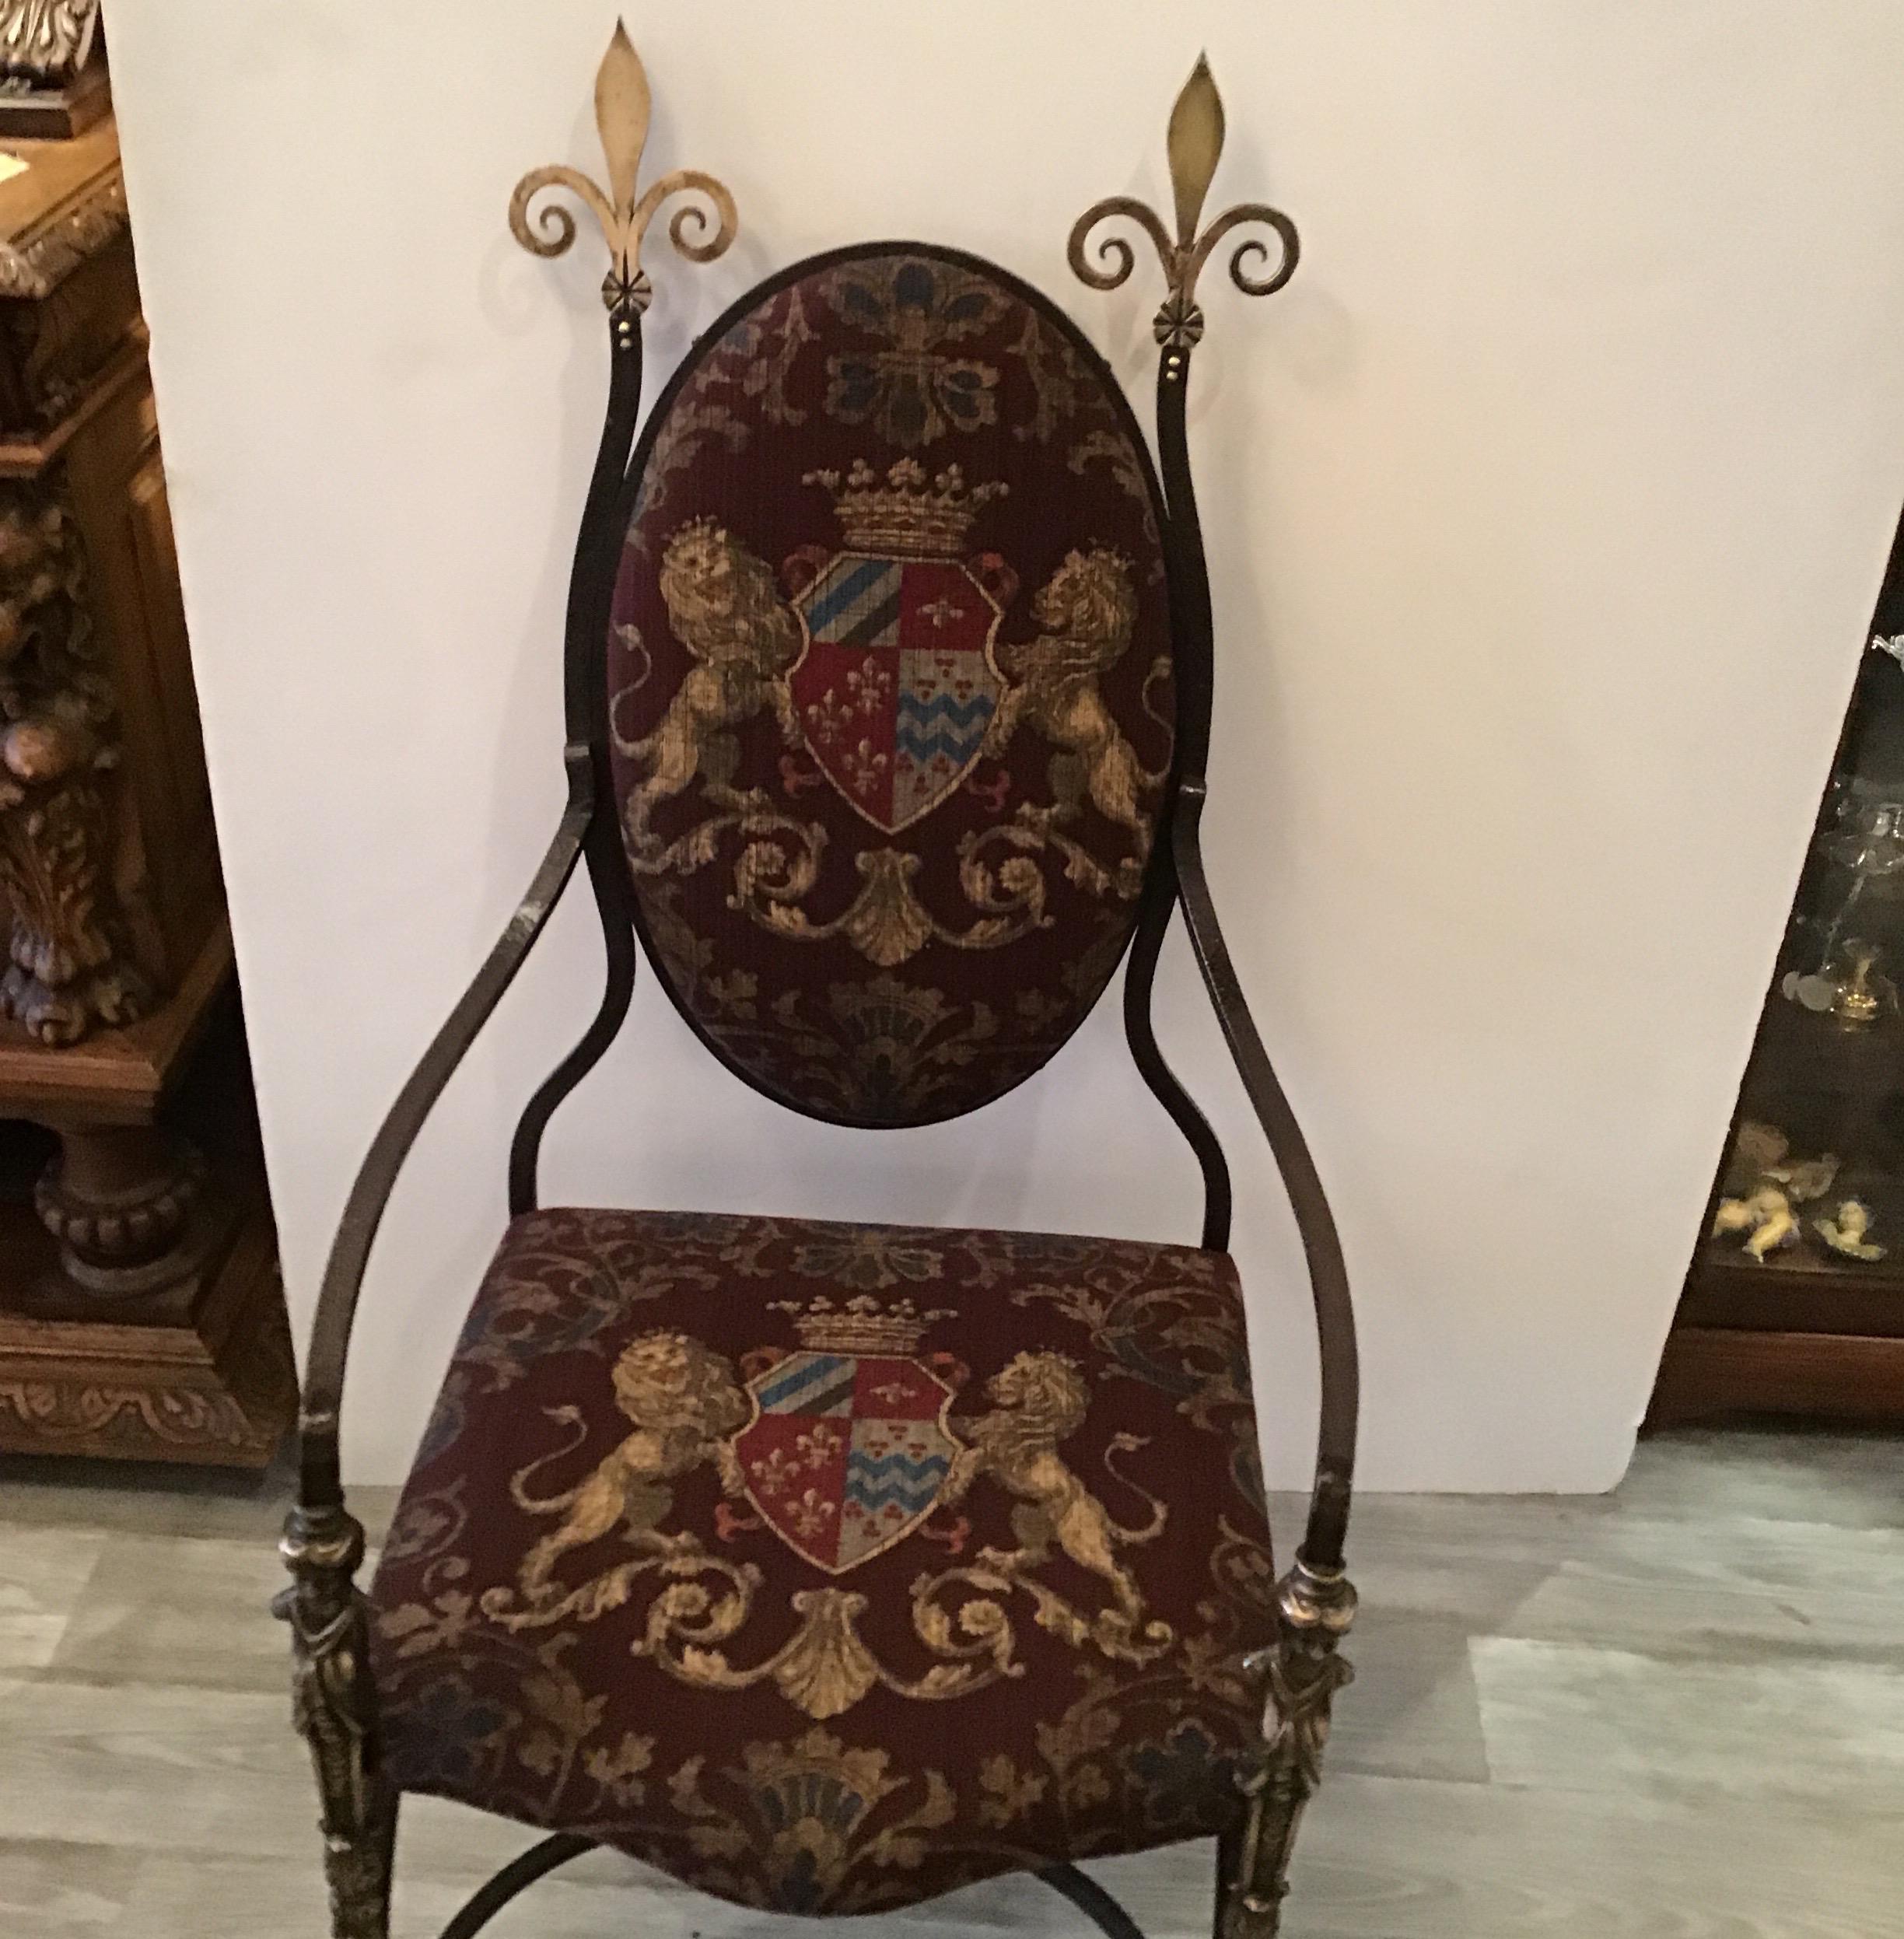 European Handmade Wrought Iron & Burnished Brass Throne Chair with Armorial Fabric, 1890s For Sale